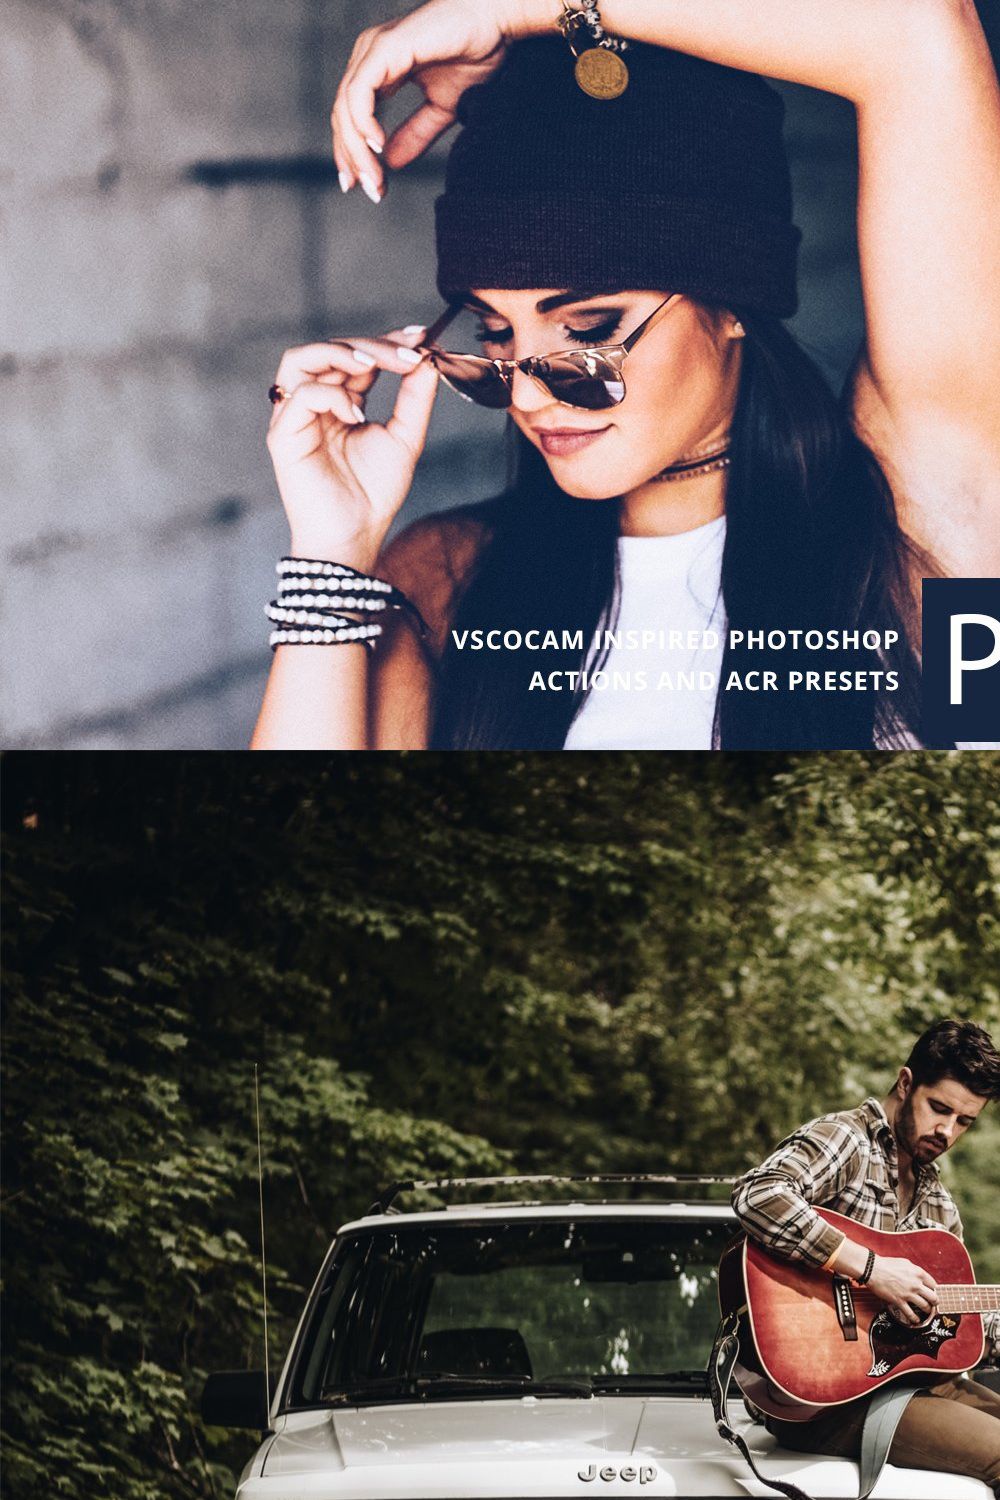 VSCOcam inspired Photoshop Actions pinterest preview image.